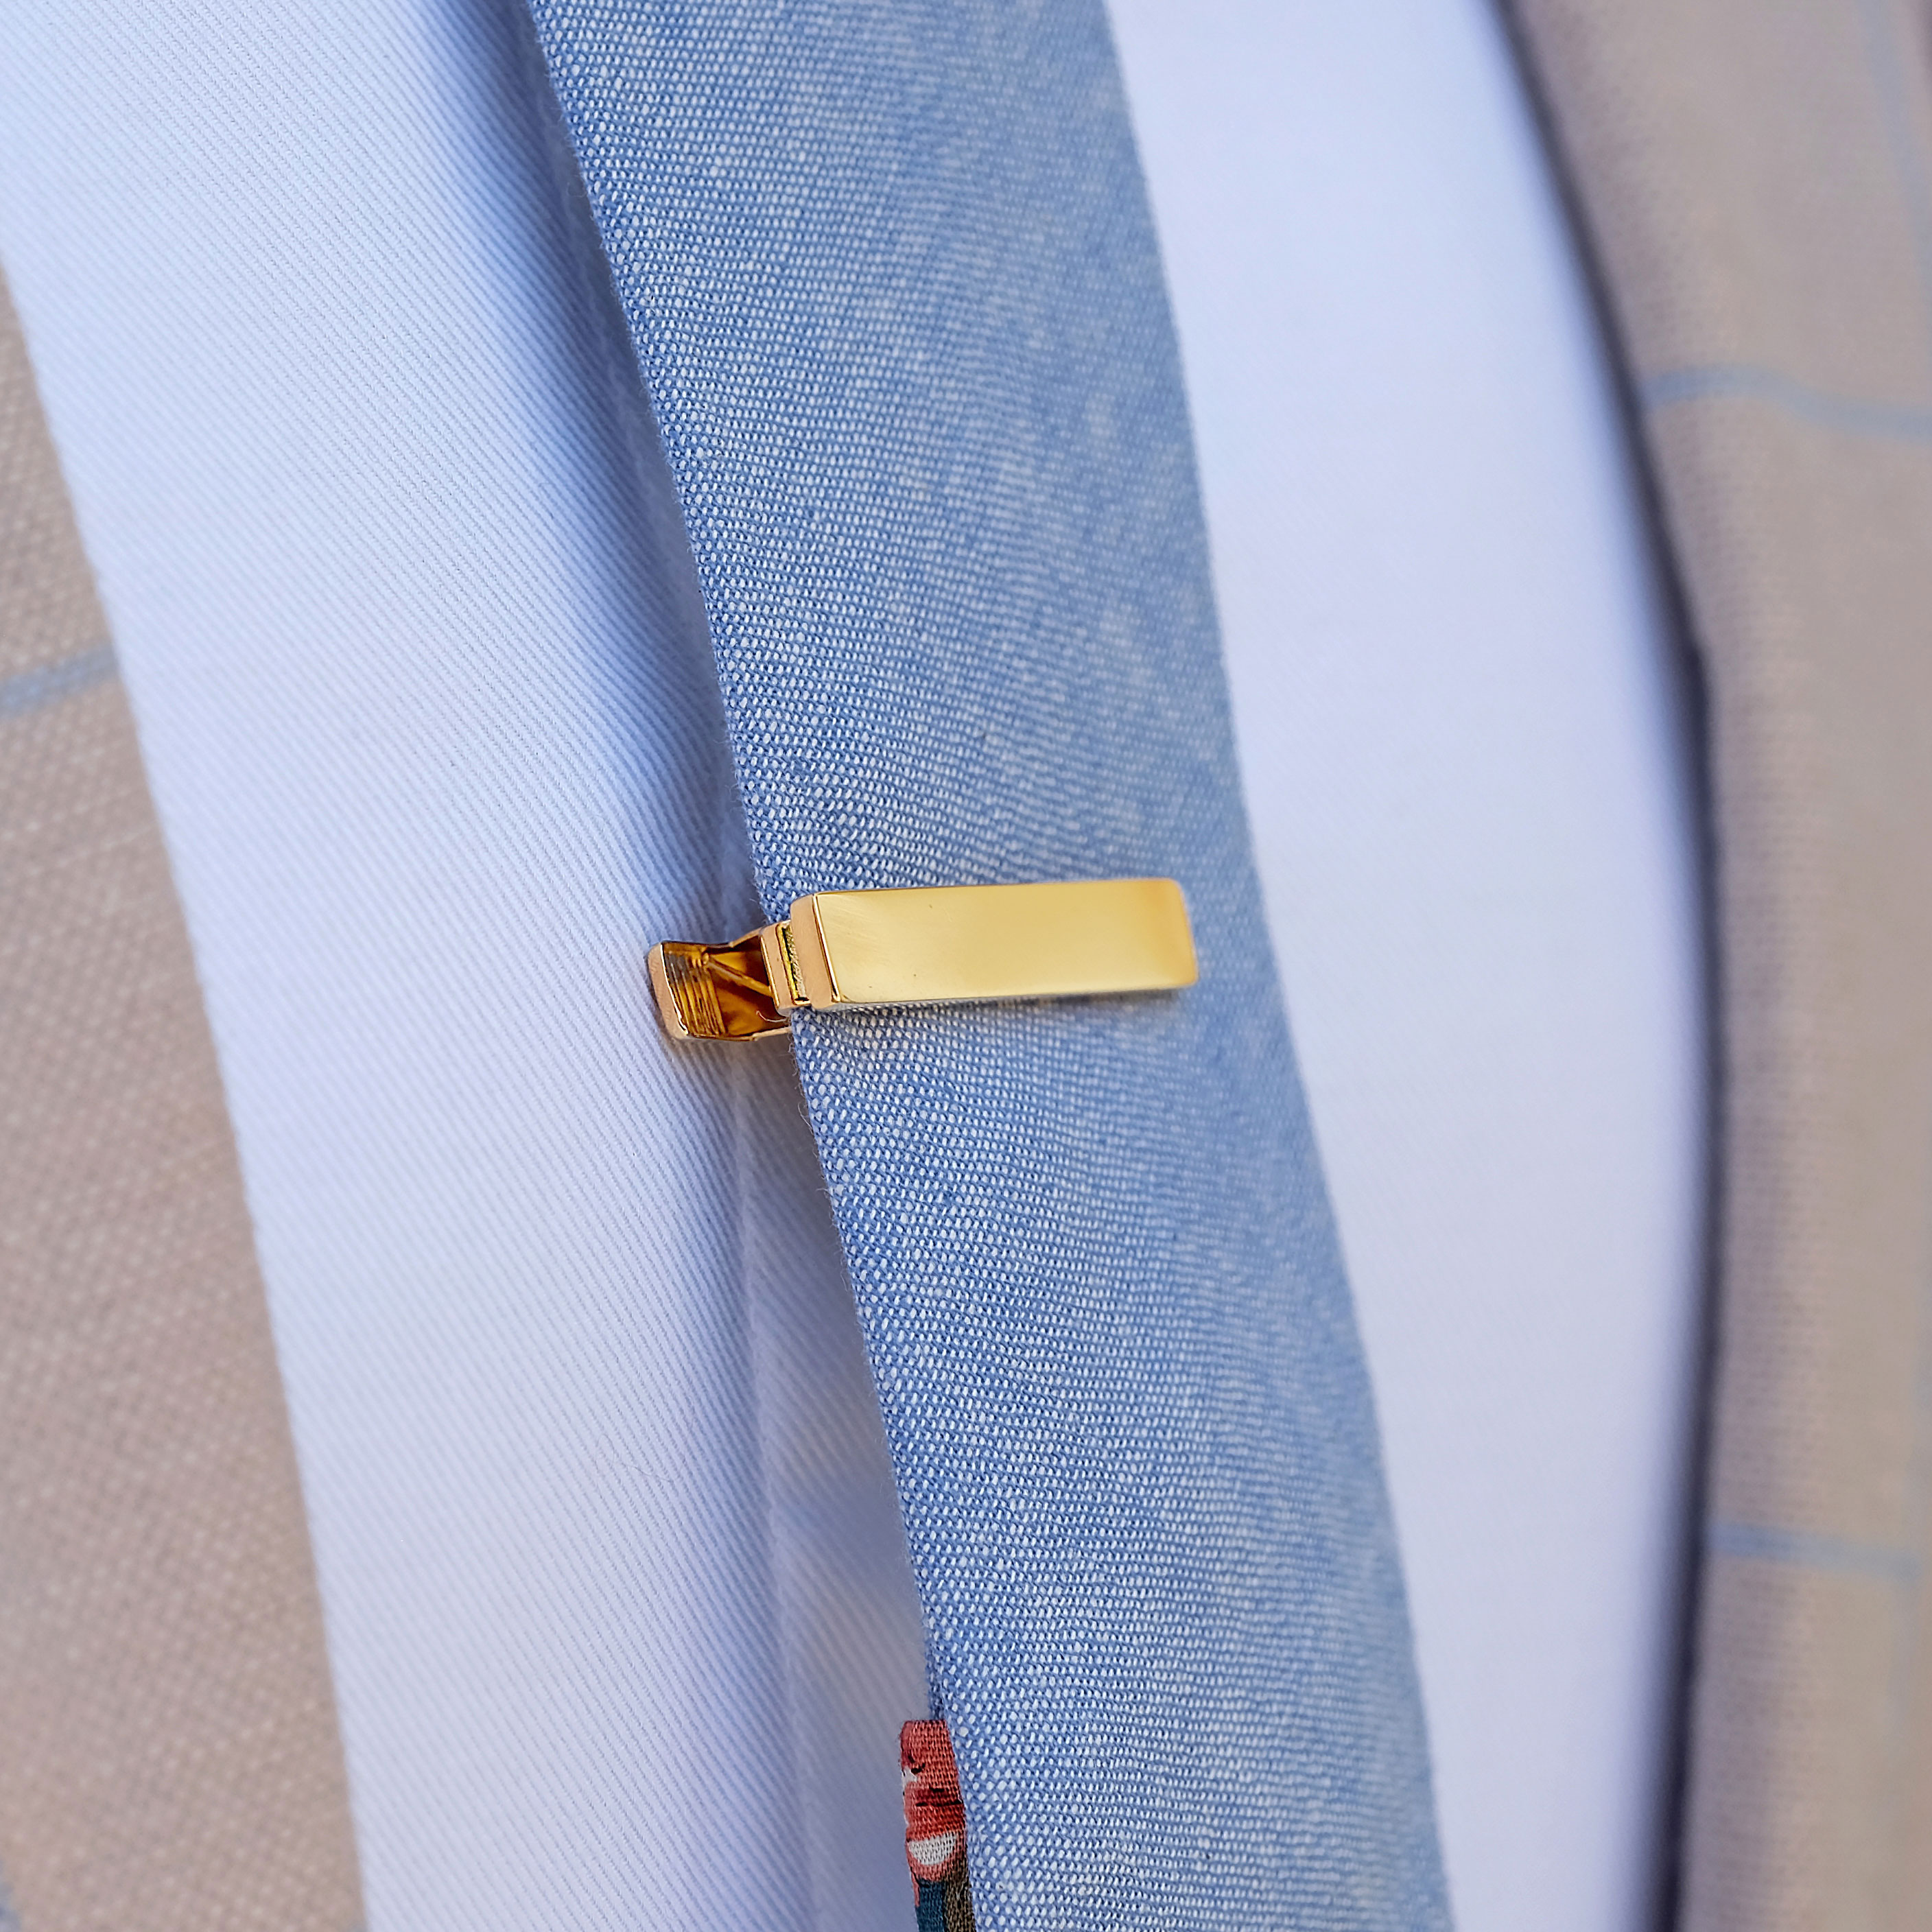 Classic Short Gold Plated Tie Clip